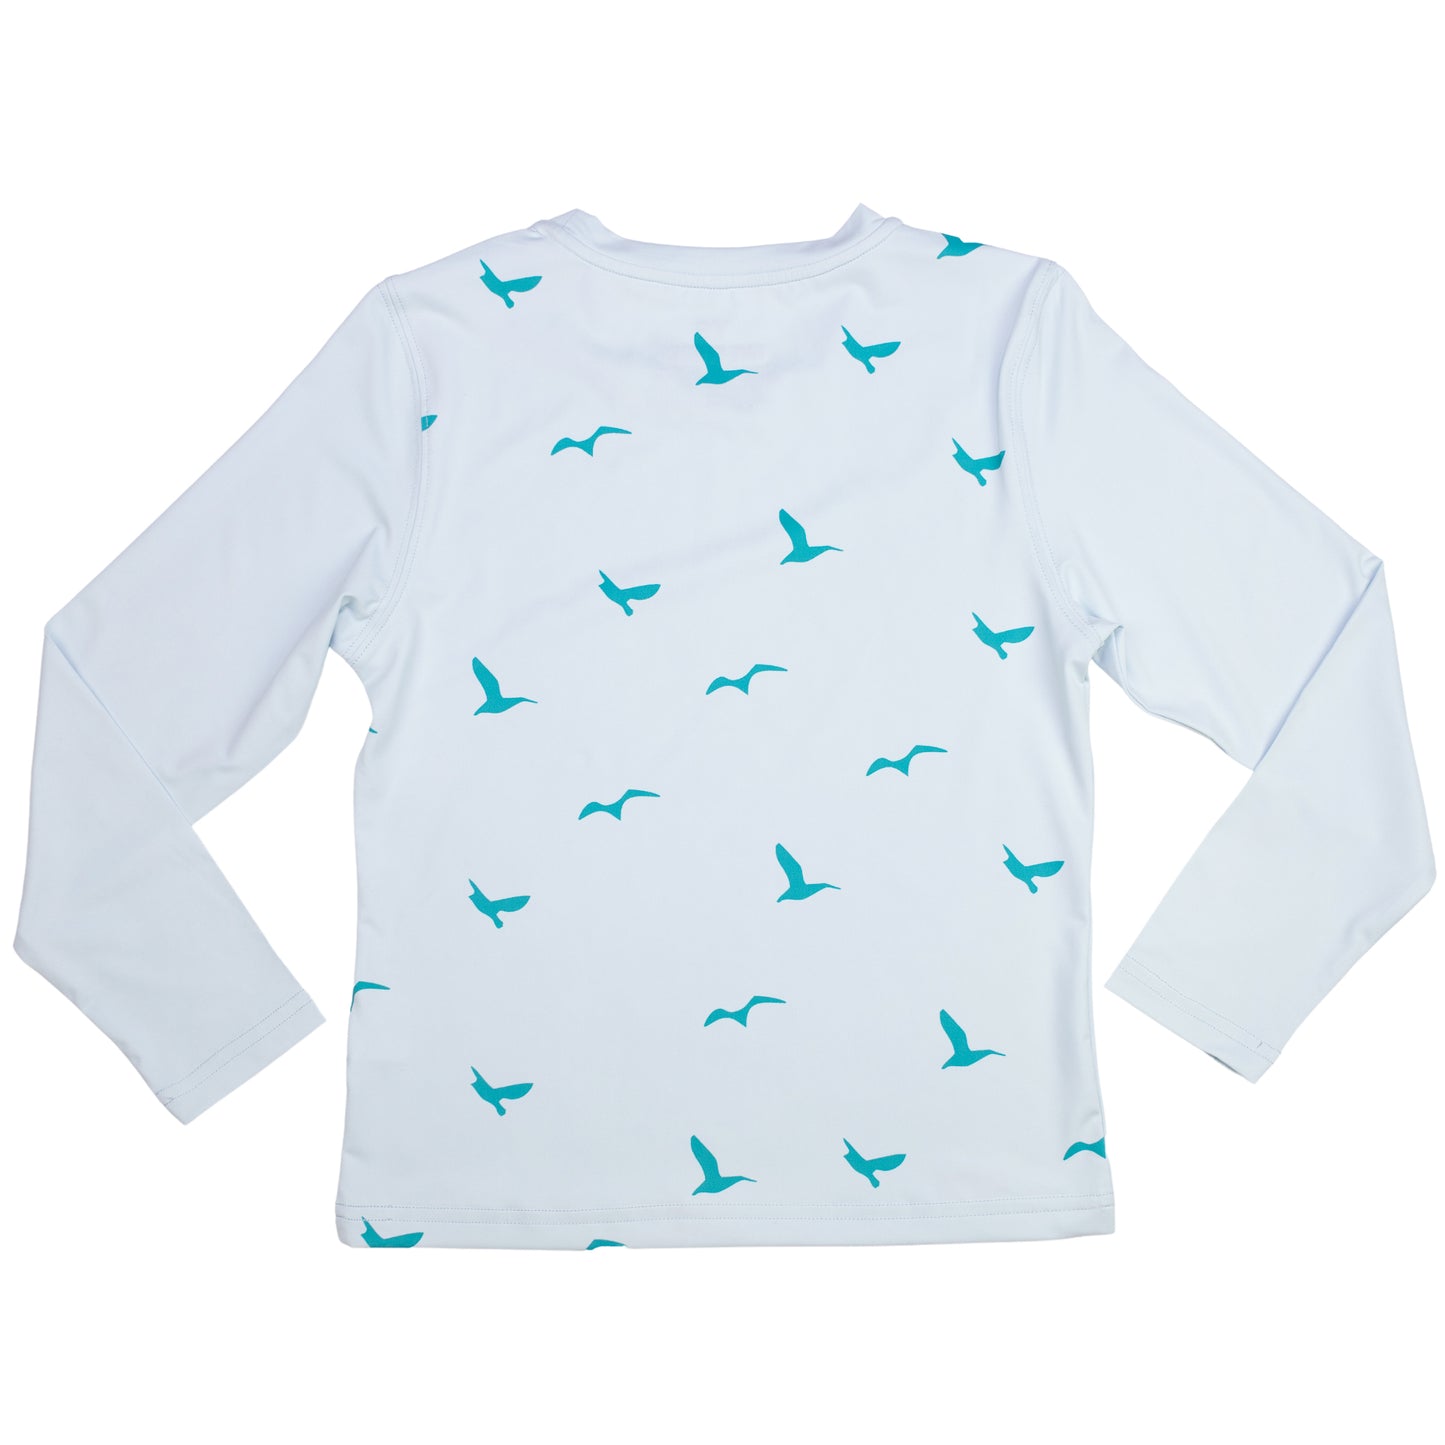 Live Wildly Youth UPF 50+ Performance Shirt - Spring Blue -  Back Laid Out -Live Wildly 